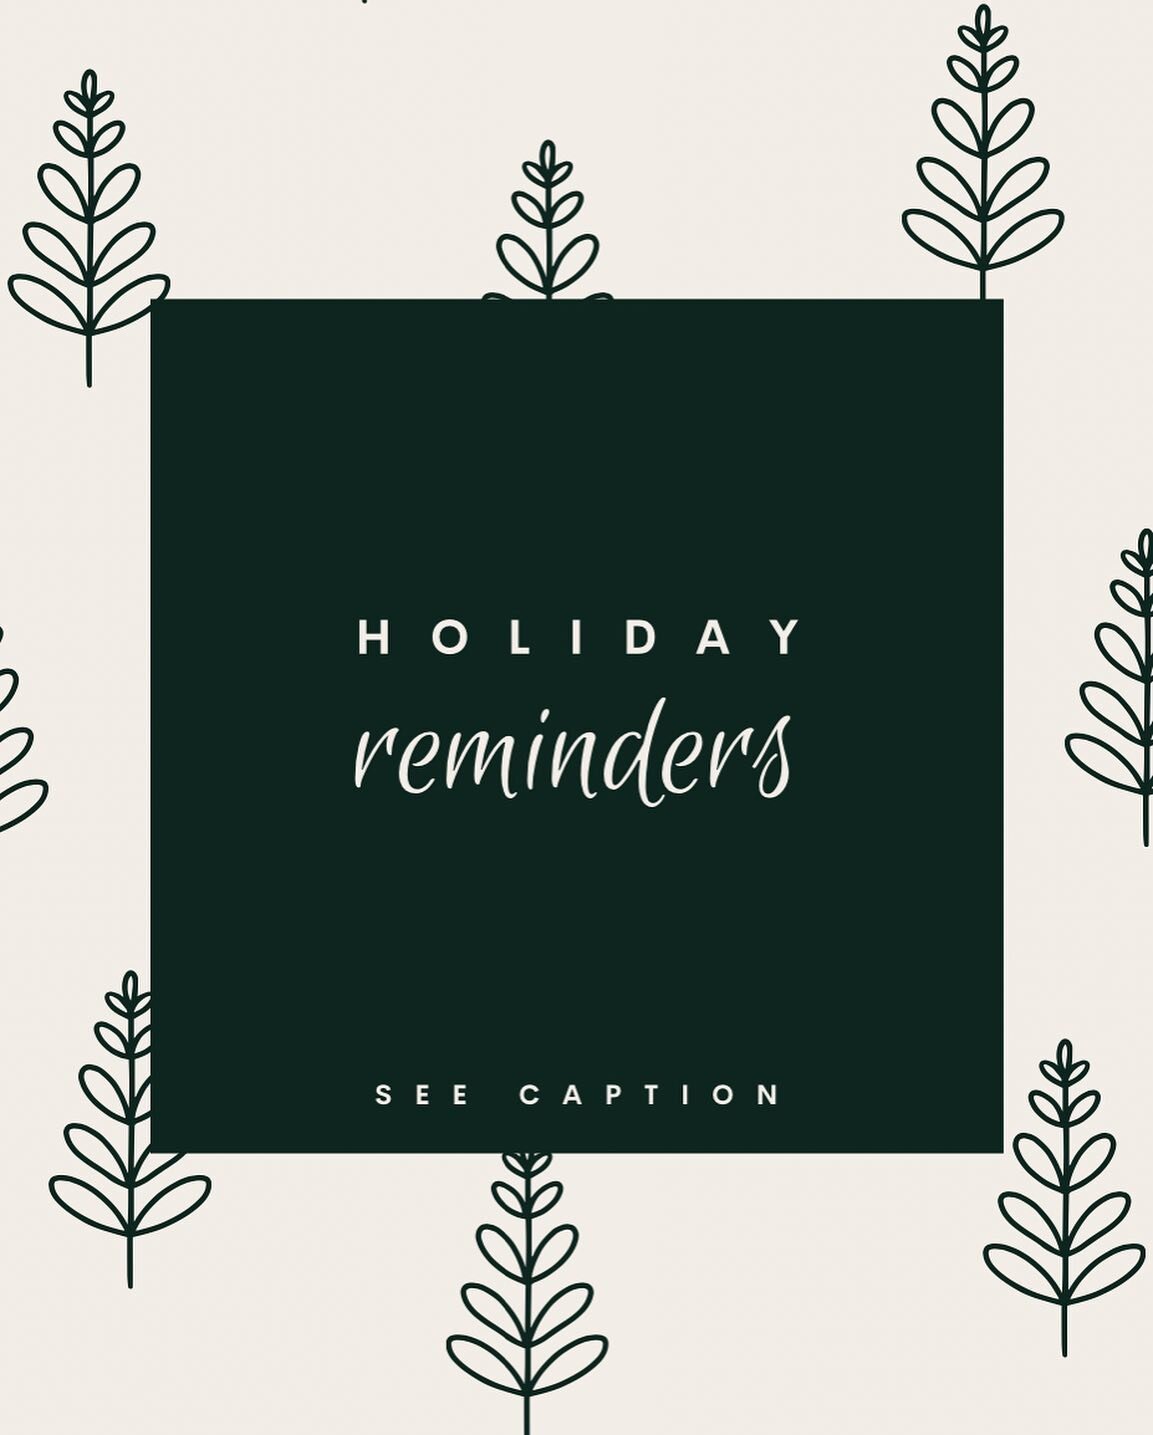 A few simple reminders for everyone as we head into holiday season:

✨IT'S OKAY IF THE HOLIDAYS ARE NOT A HAPPY TIME FOR YOU

✨YOU ARE ALLOWED TO HAVE PHYSICAL AND EMOTIONAL BOUNDARIES WITH FAMILY

✨YOUR VALUE HAS NOTHING TO DO WITH HOW YOUR CLOTHES 